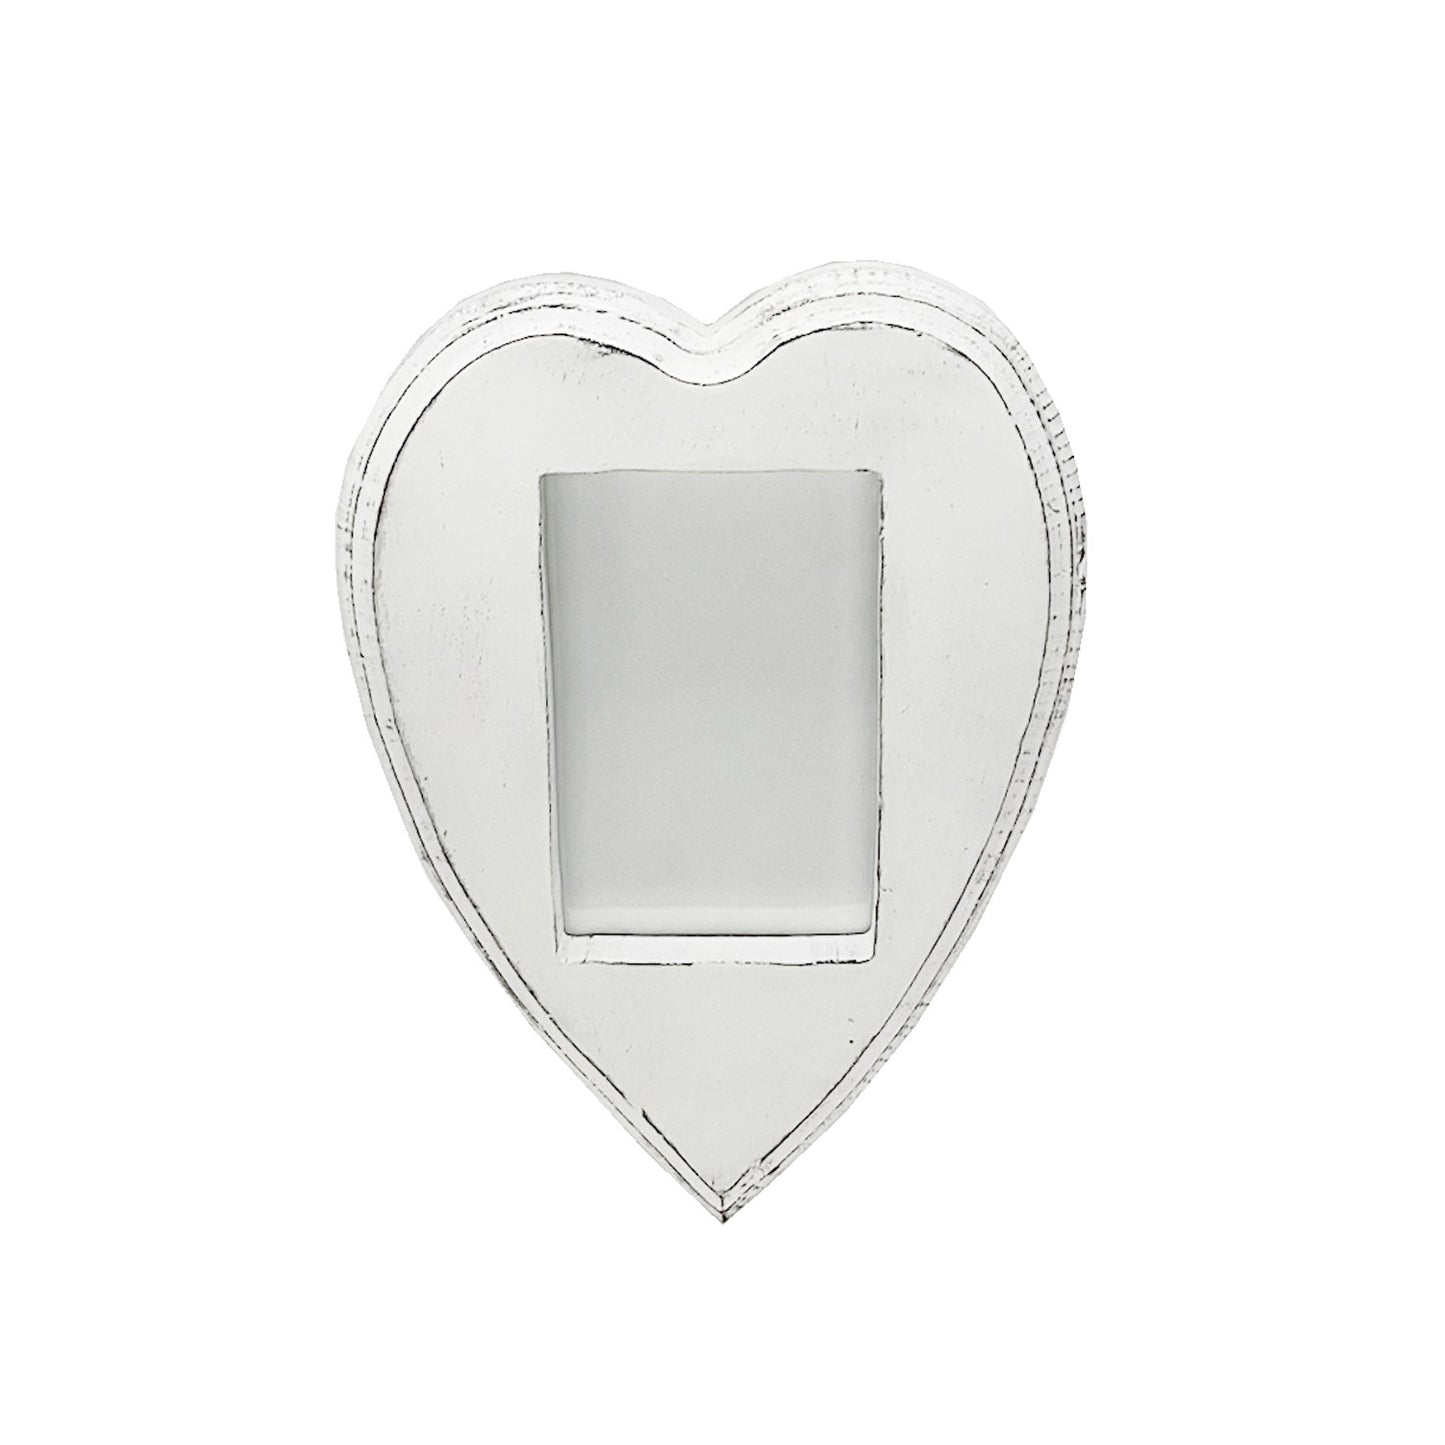 Wooden Heart Cut Out Photo Frame